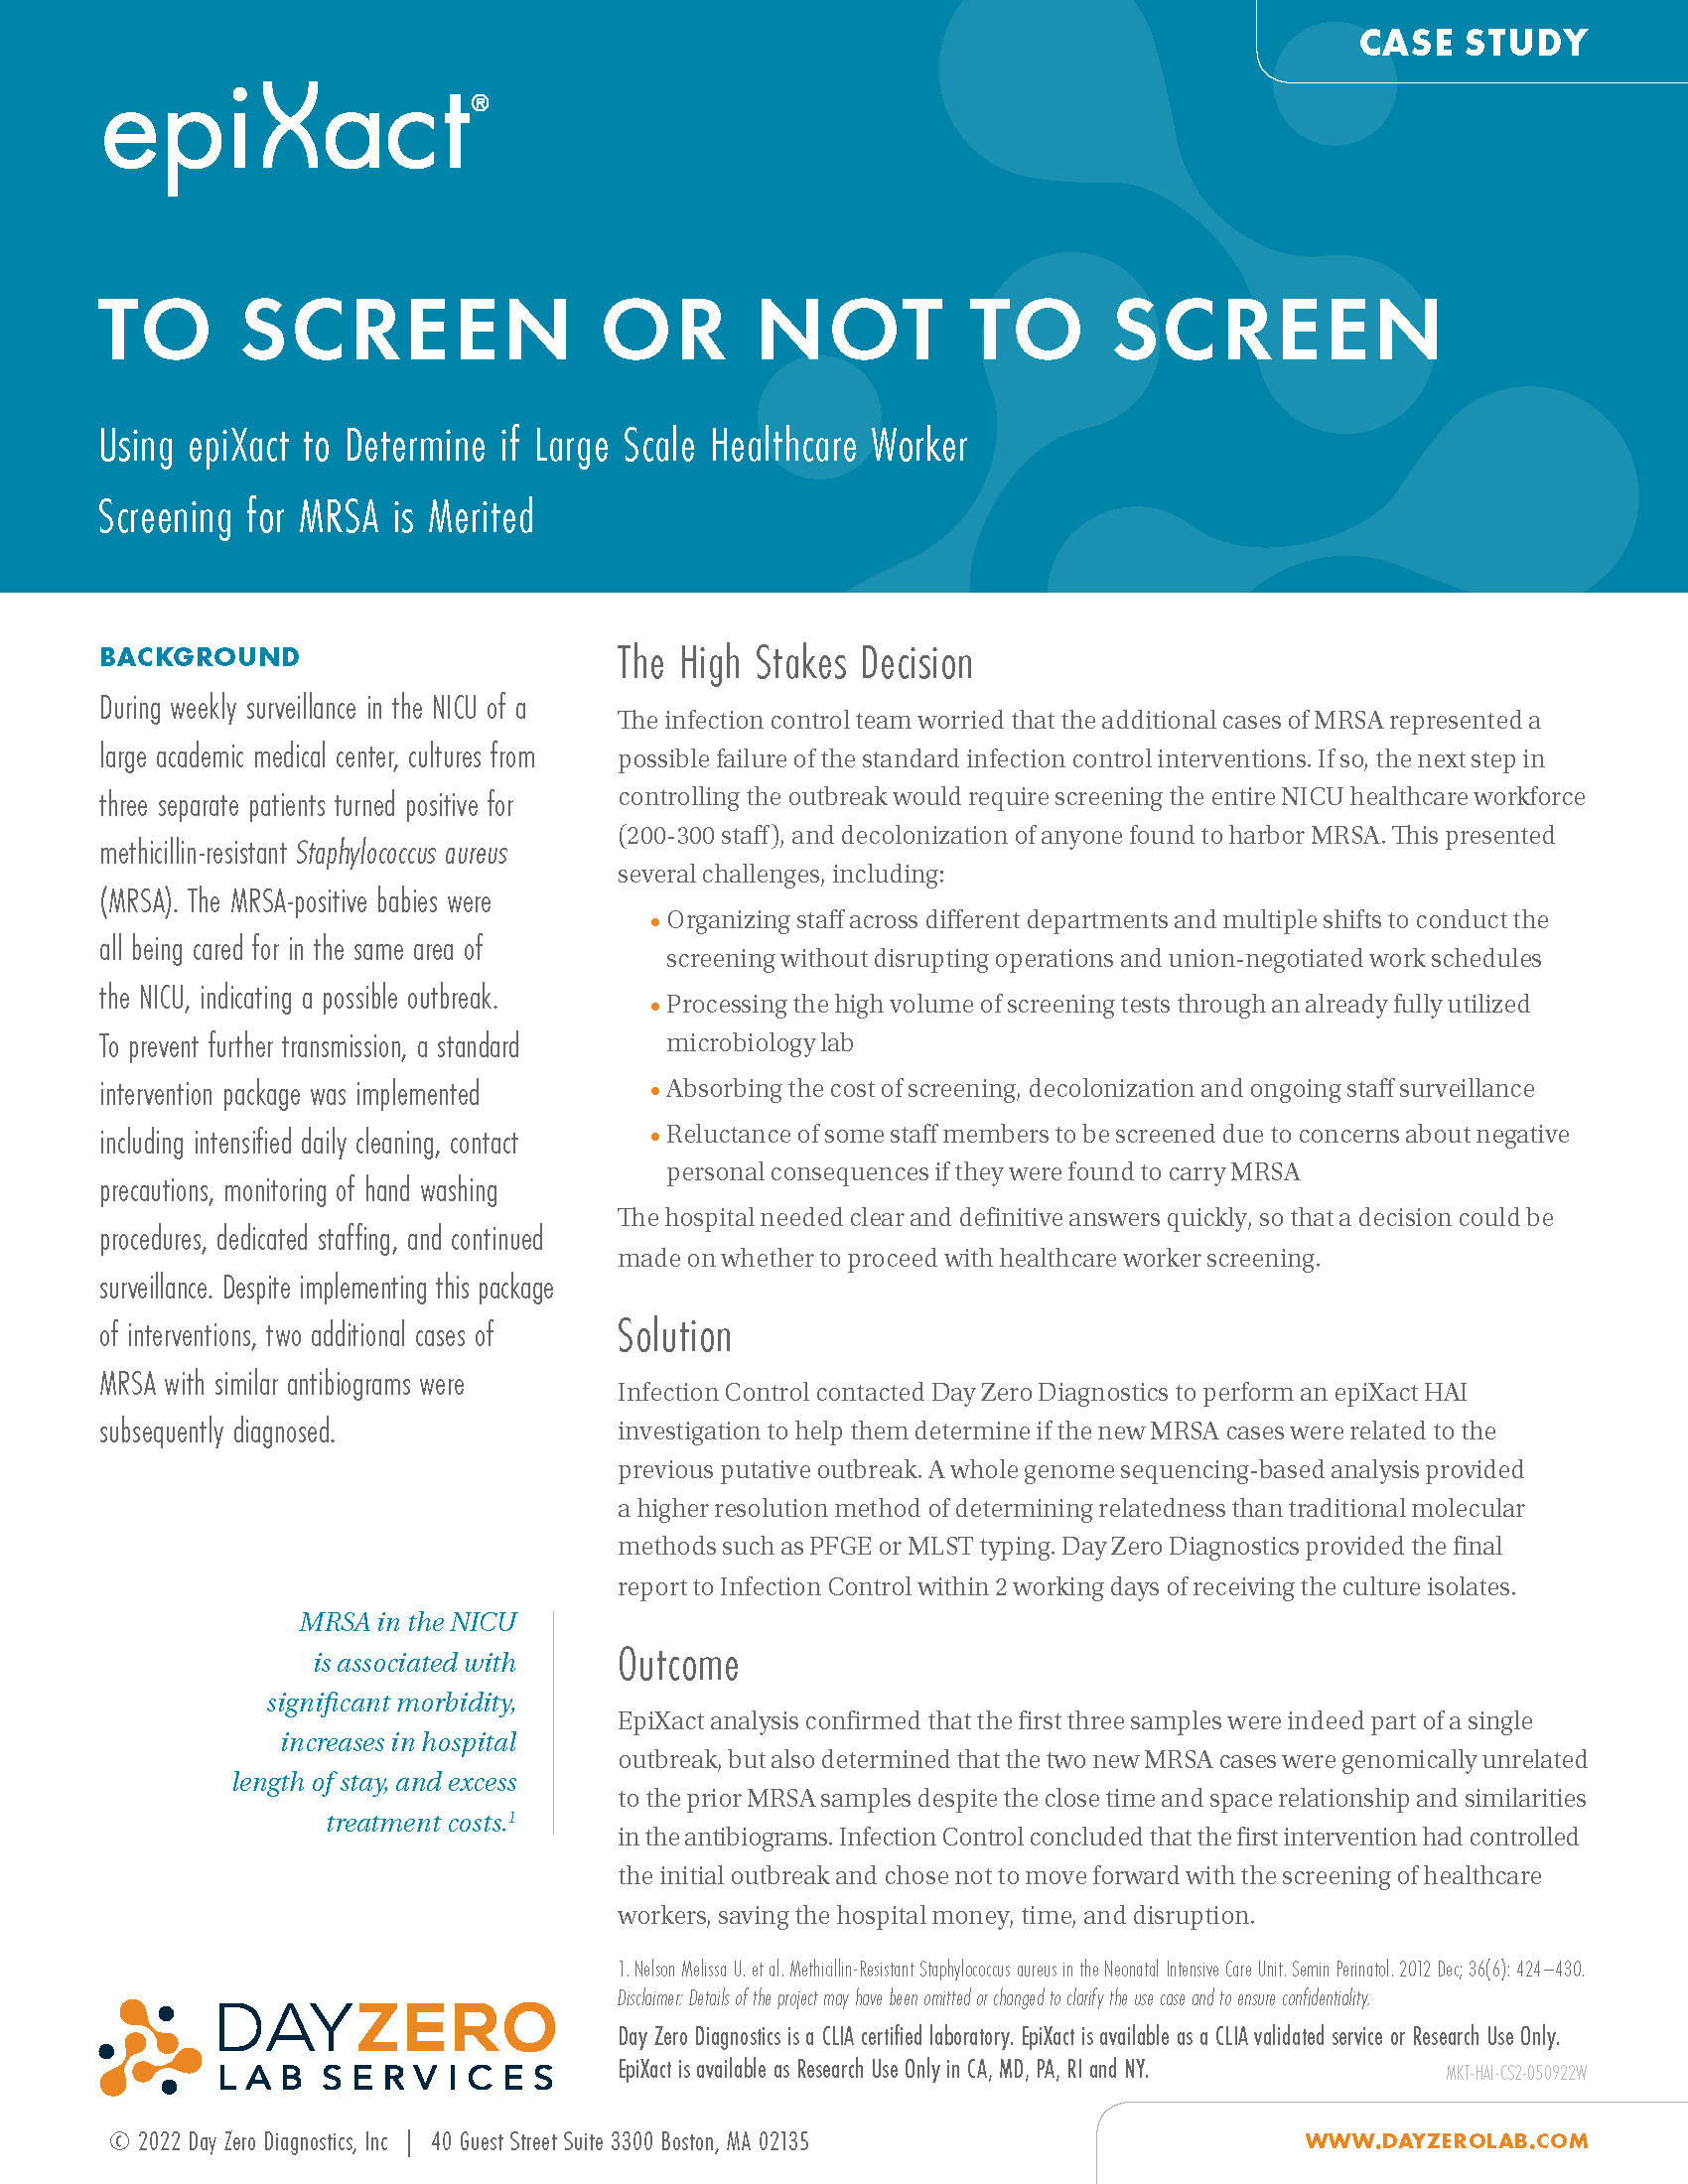 Case Study: To Screen or Not to Screen